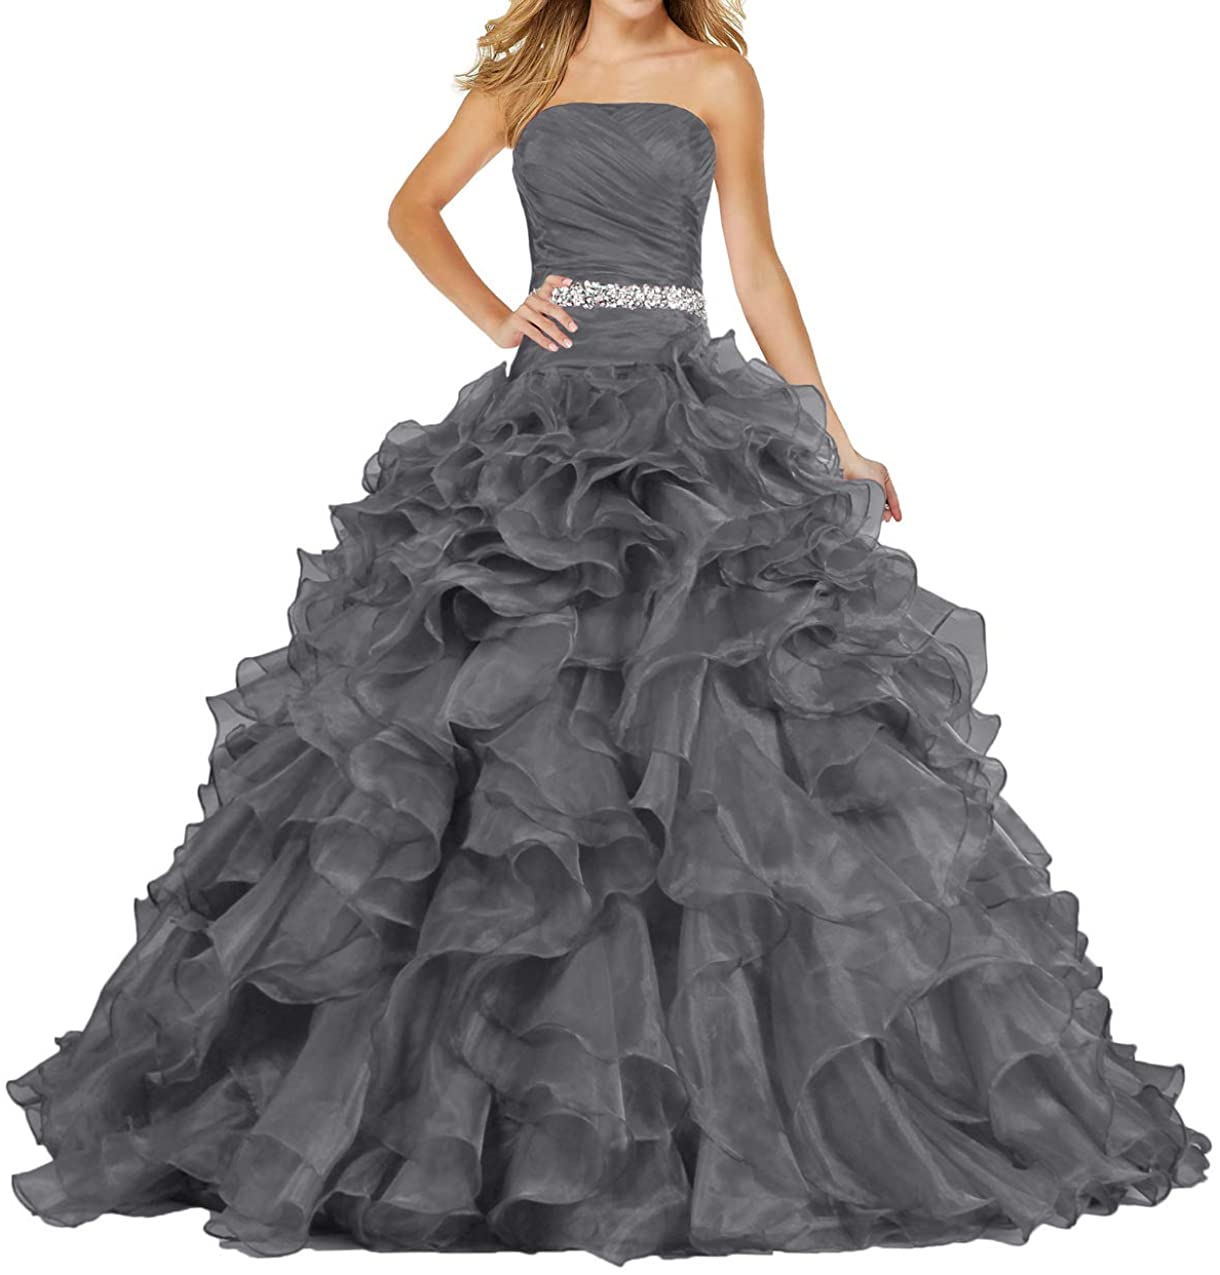 ANTS Womens Sweetheart Formal Quinceanera Dress Prom Gown